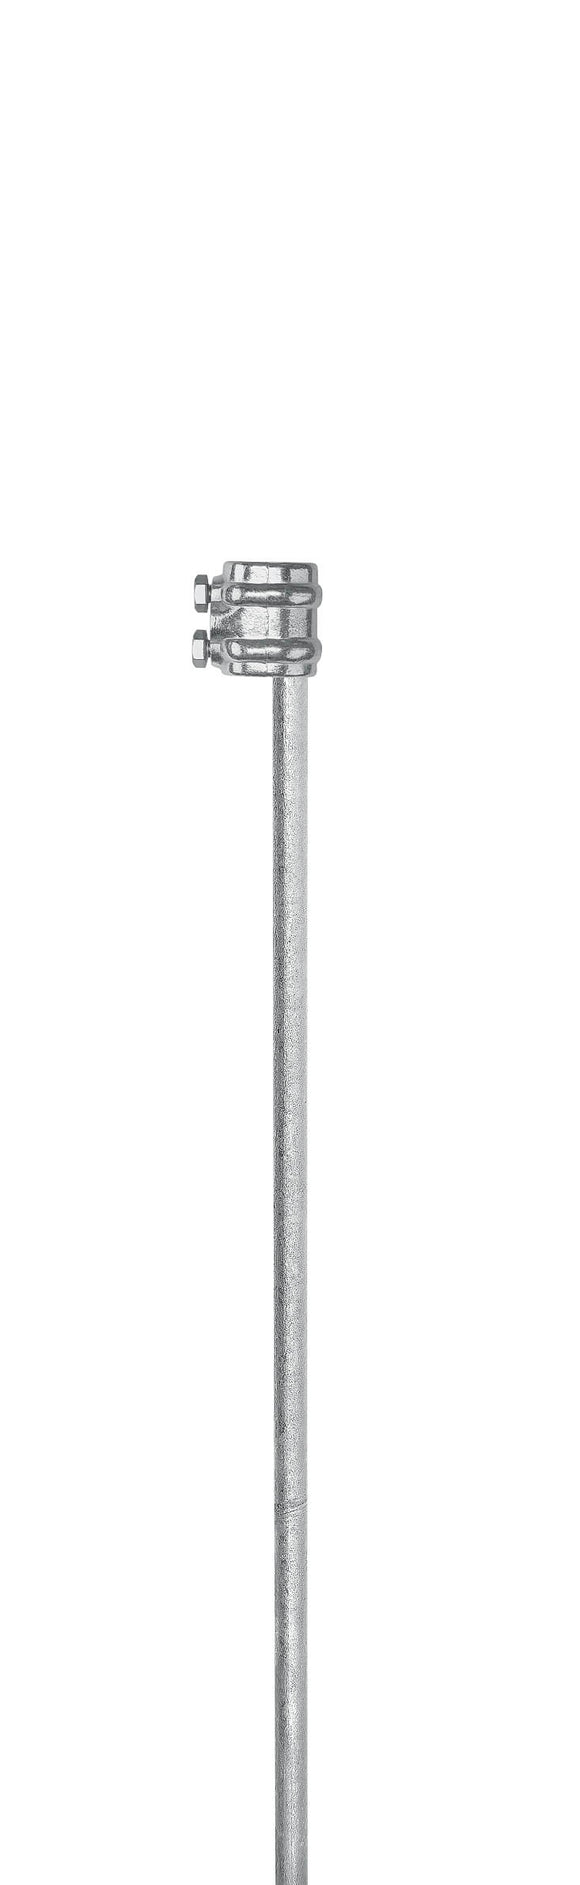 Earth Stake with Clamp - 1.0m